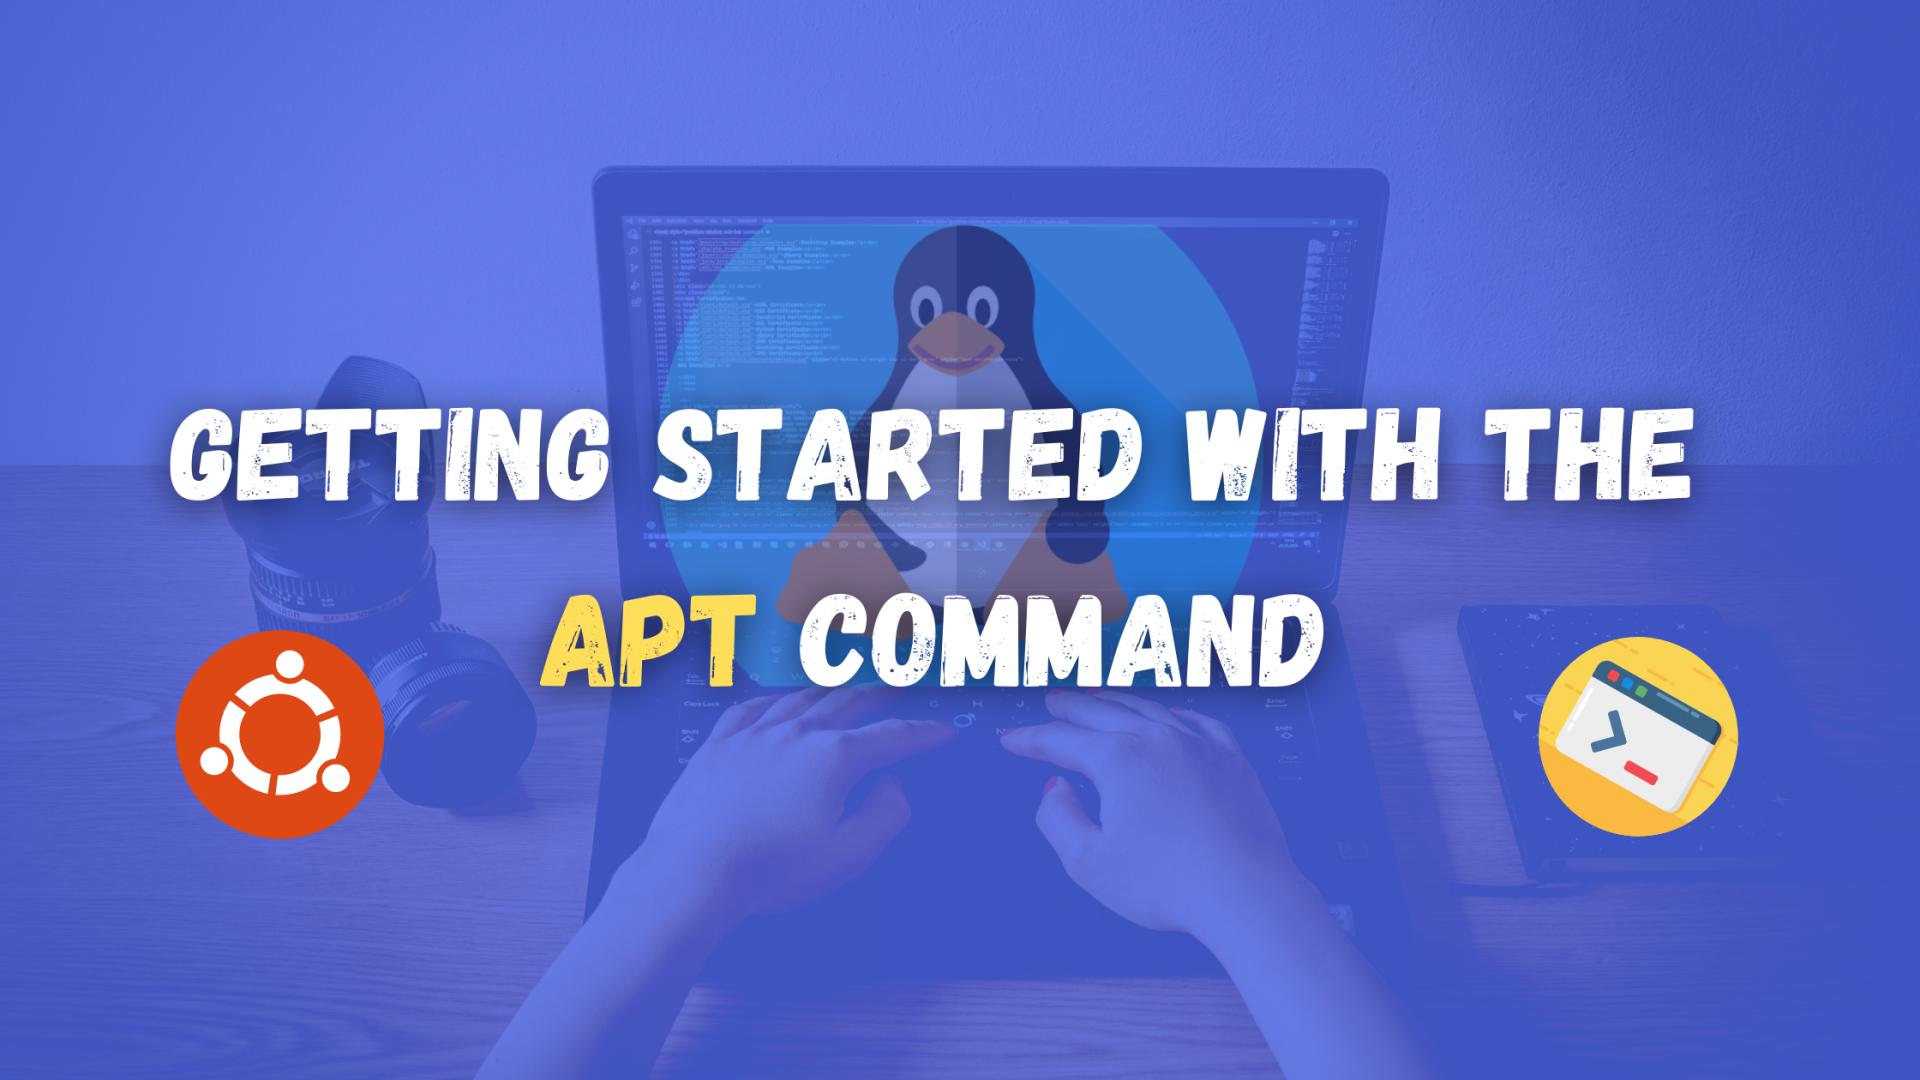 How to get started with the apt command on Ubuntu/Debian Linux?